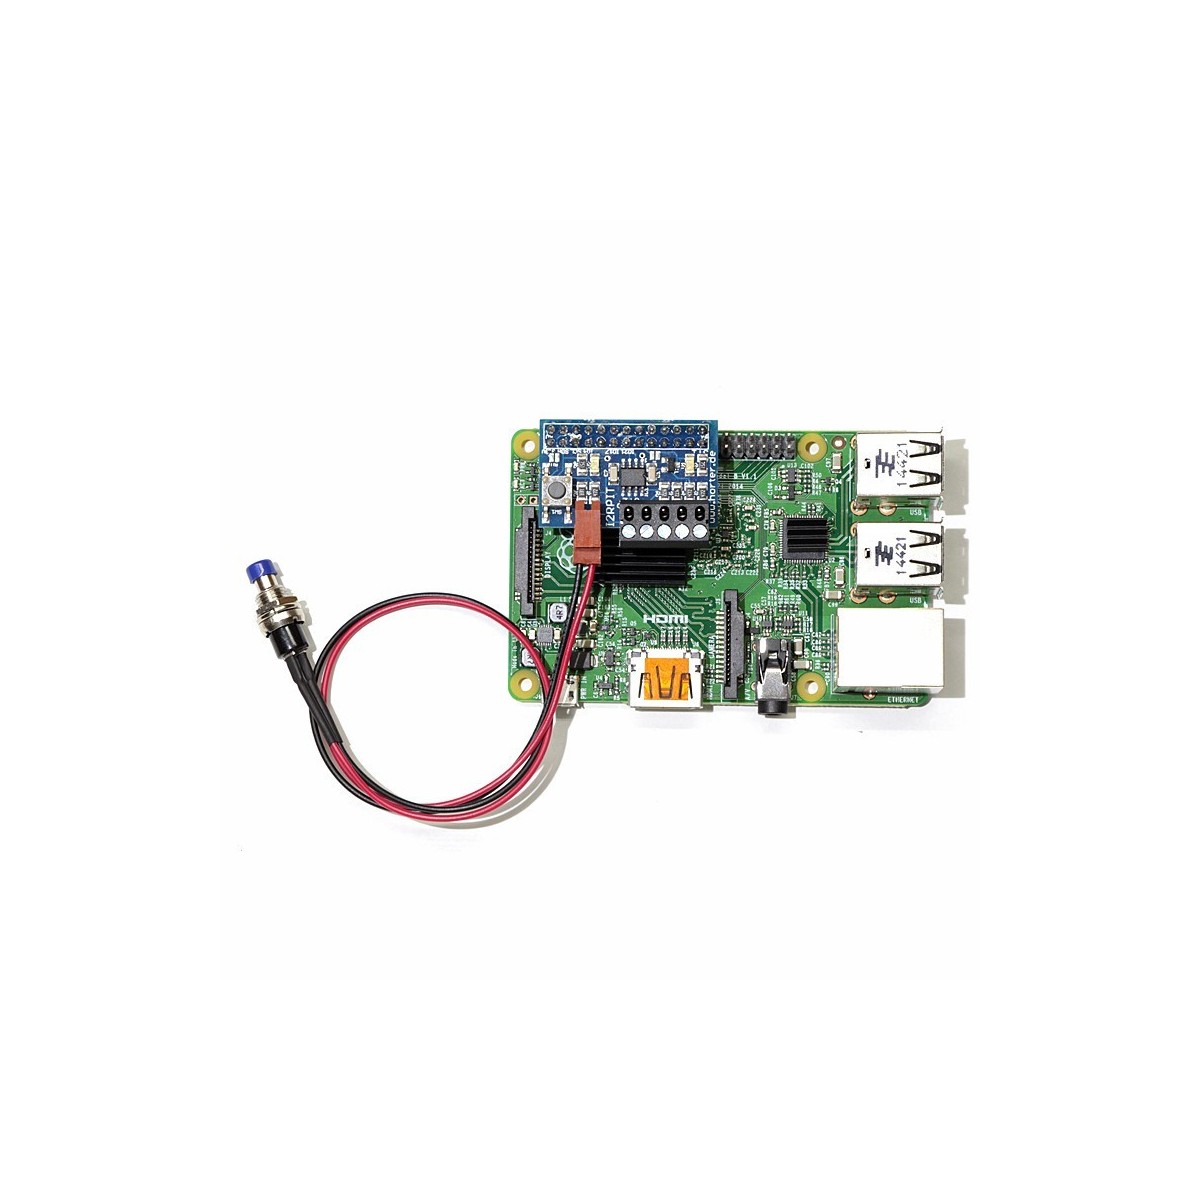 I2C-Repeater with switch on Raspberry PI